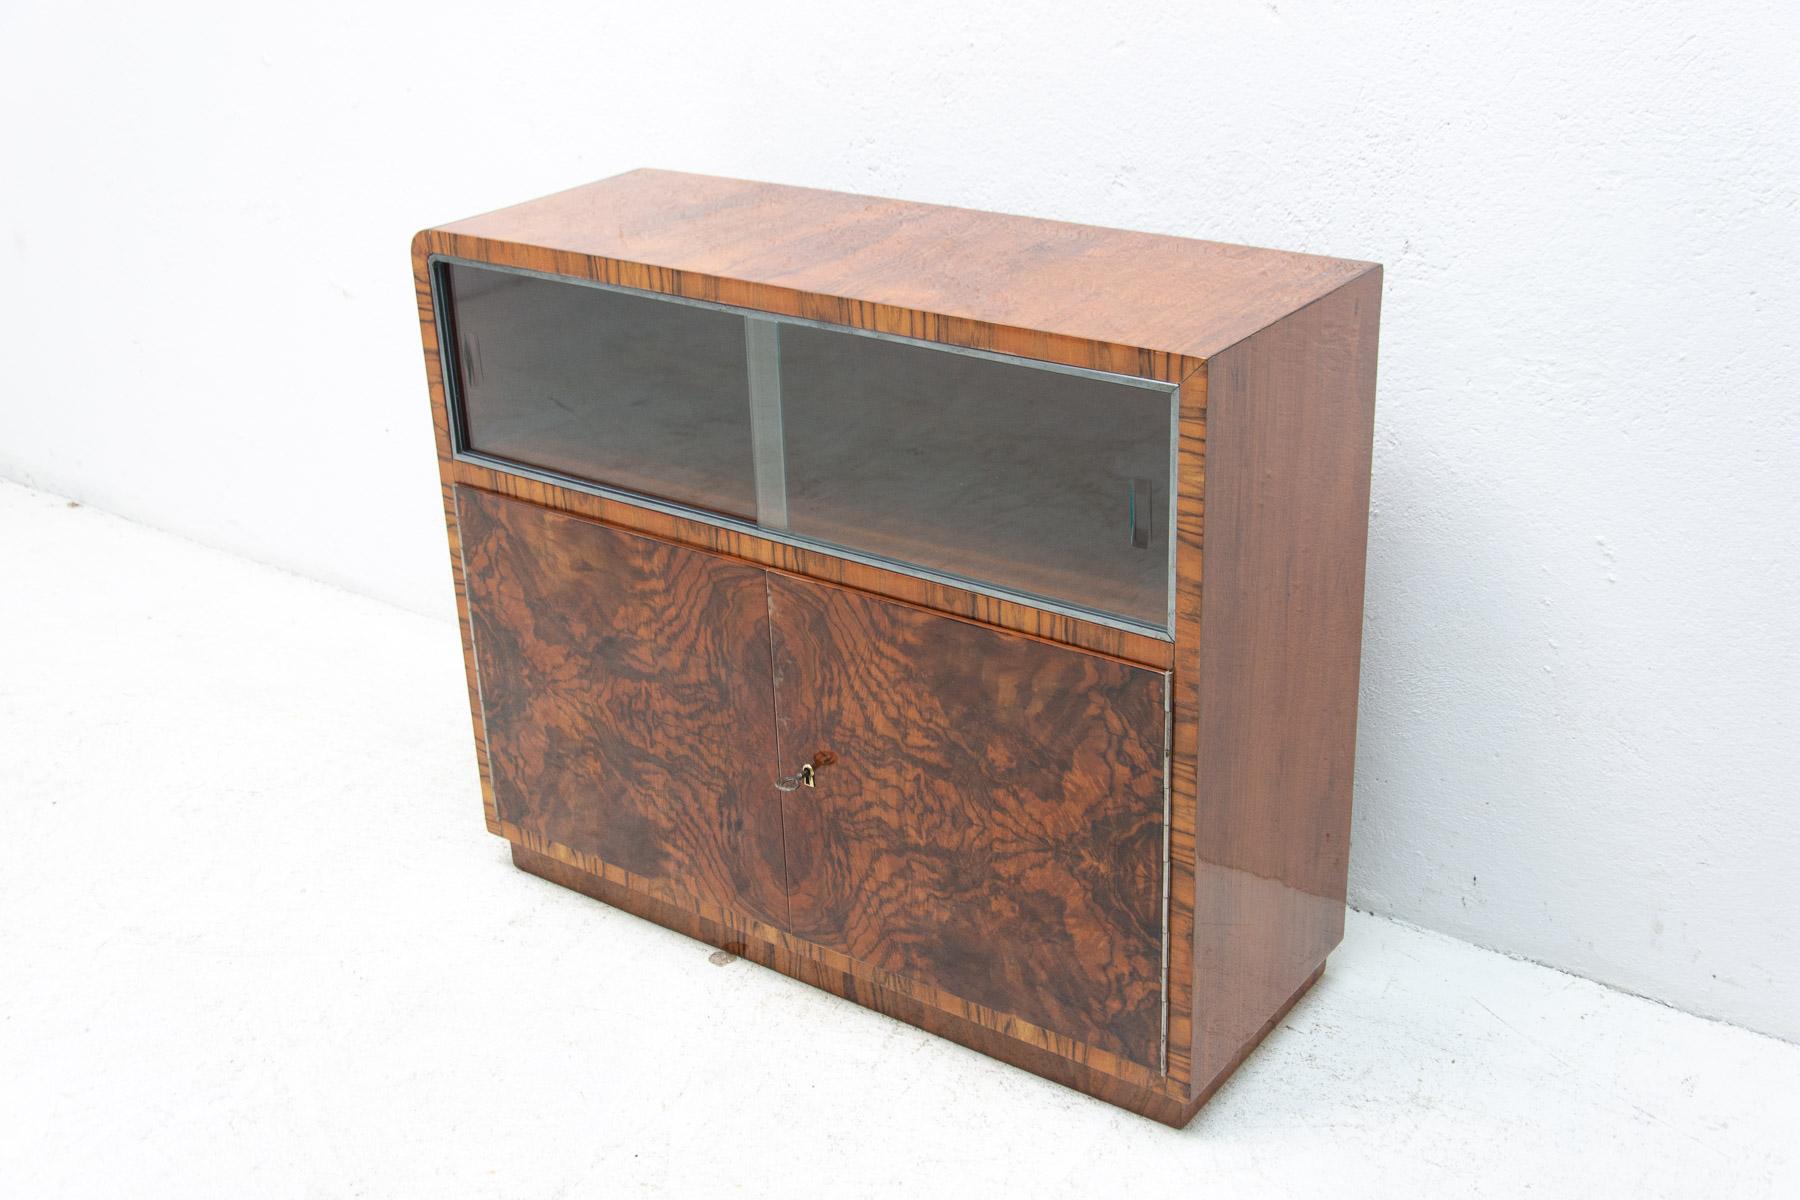 Bohemian glazed bar or sideboard in walnut veneer from the Art Deco period. It wase made in the 1930´s. It features a very simple and practical design. Standing on a massive rectangular base. Consists of two storage spaces, one is glazed and the